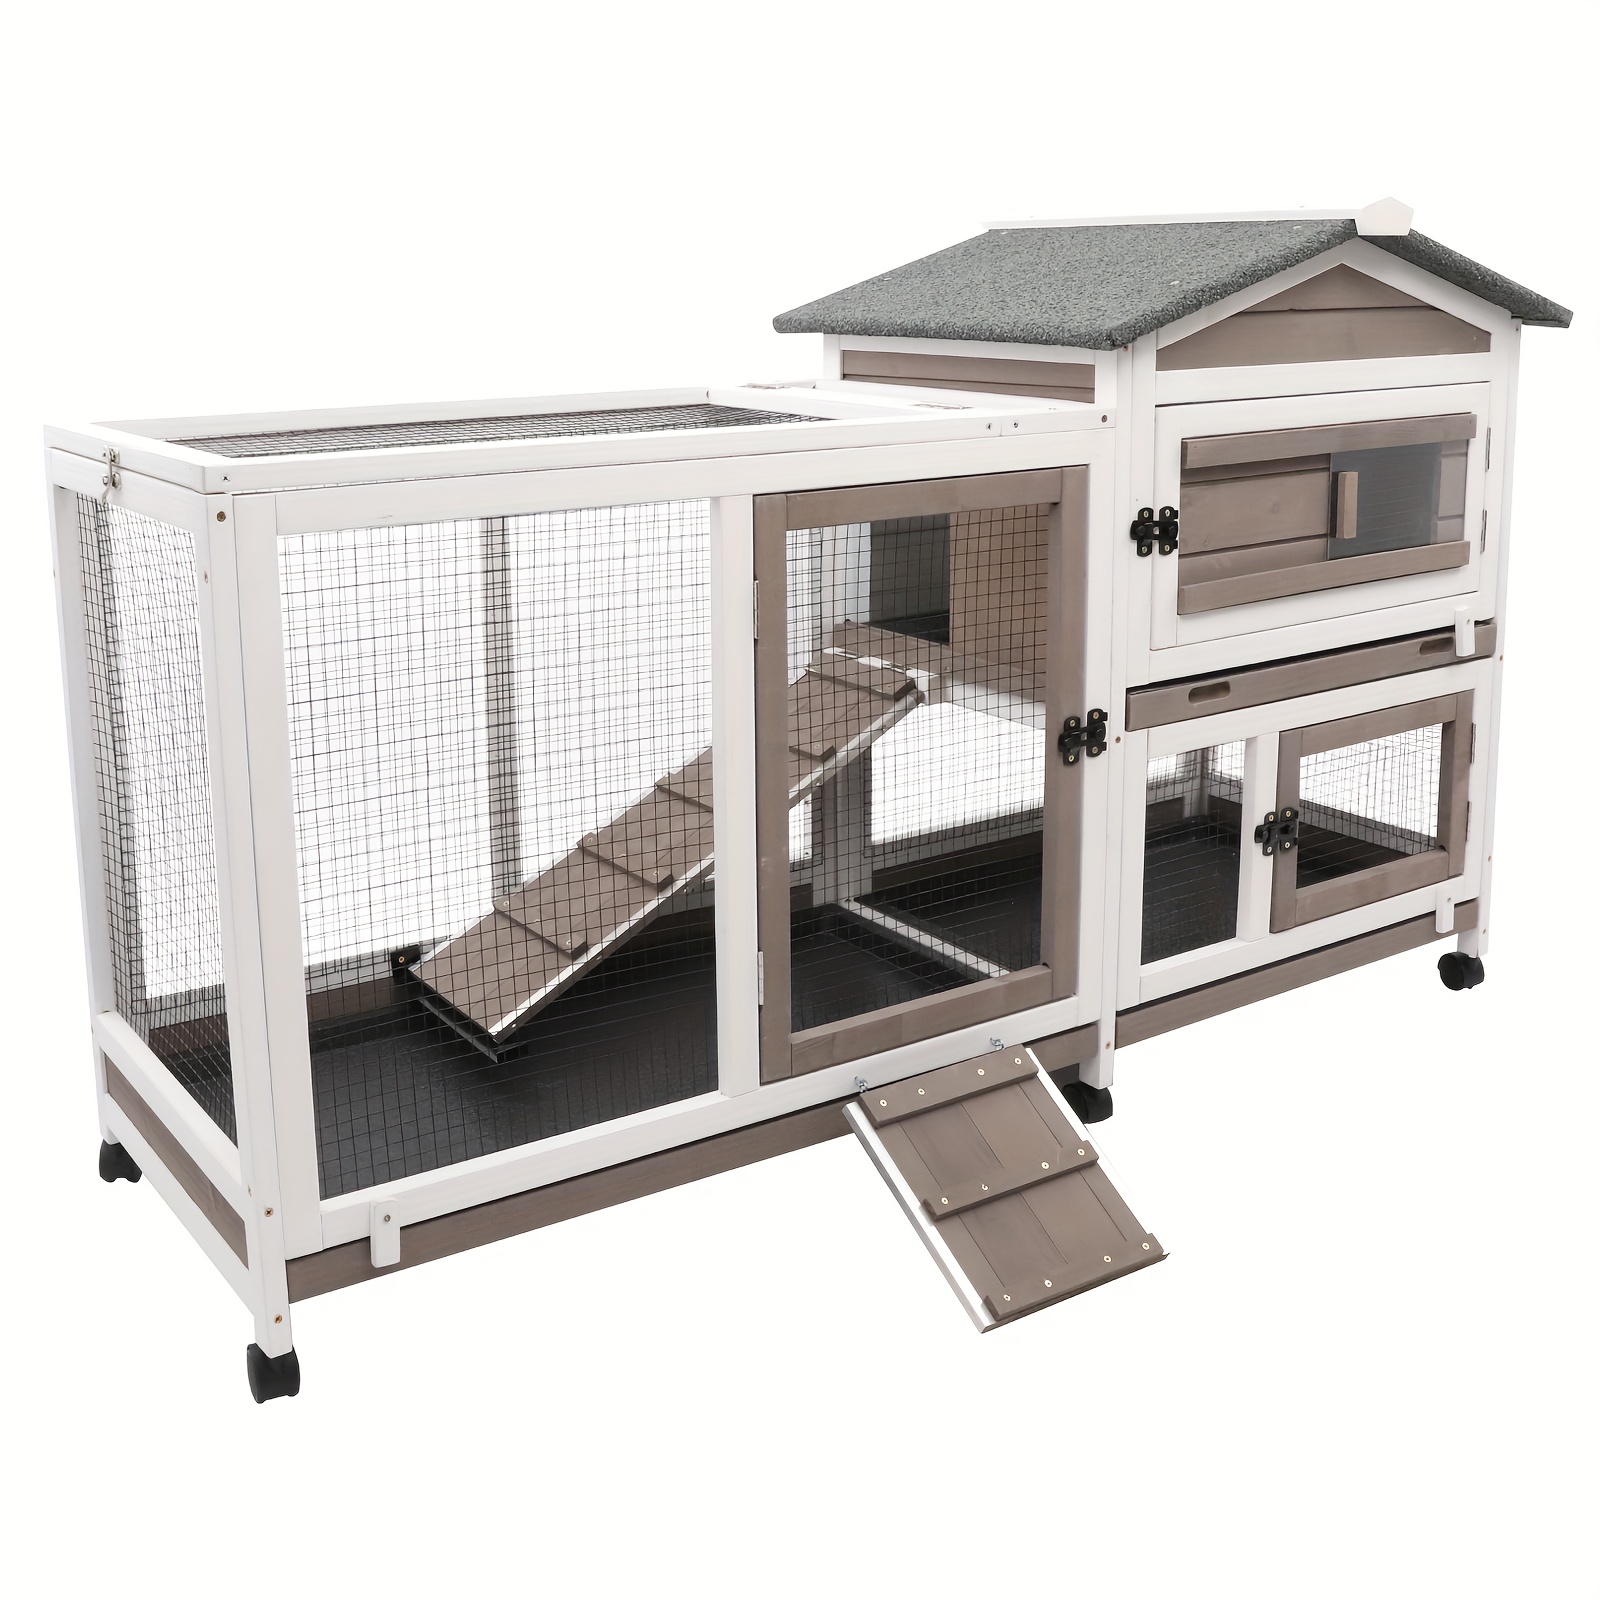 

Petscosset Rabbit Hutch Indoor Outdoor 2 Story Bunny Cage With 3 No Leak Trays, 55.31"l Guinea Pig Cages Rabbit Cage With 6 Wheels For Guinea Pig, Rabbit, Hamster, Chicks (white/grey)